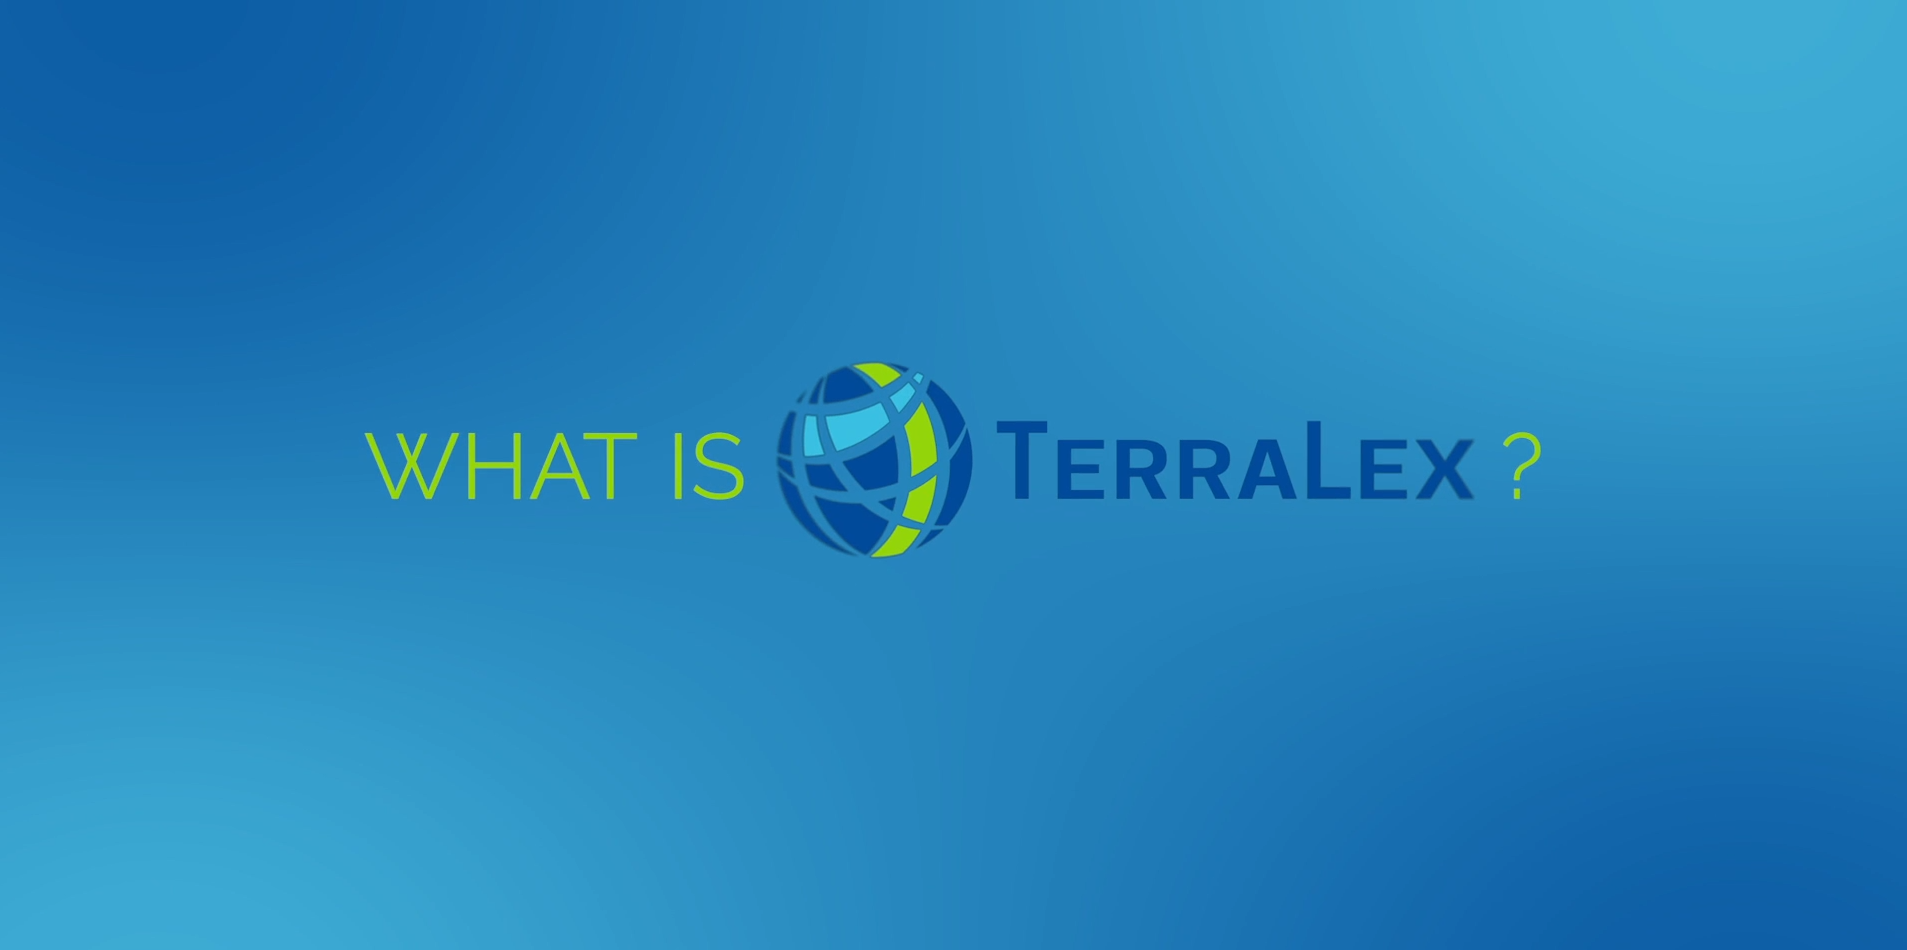 click here to watch a video about TerraLex